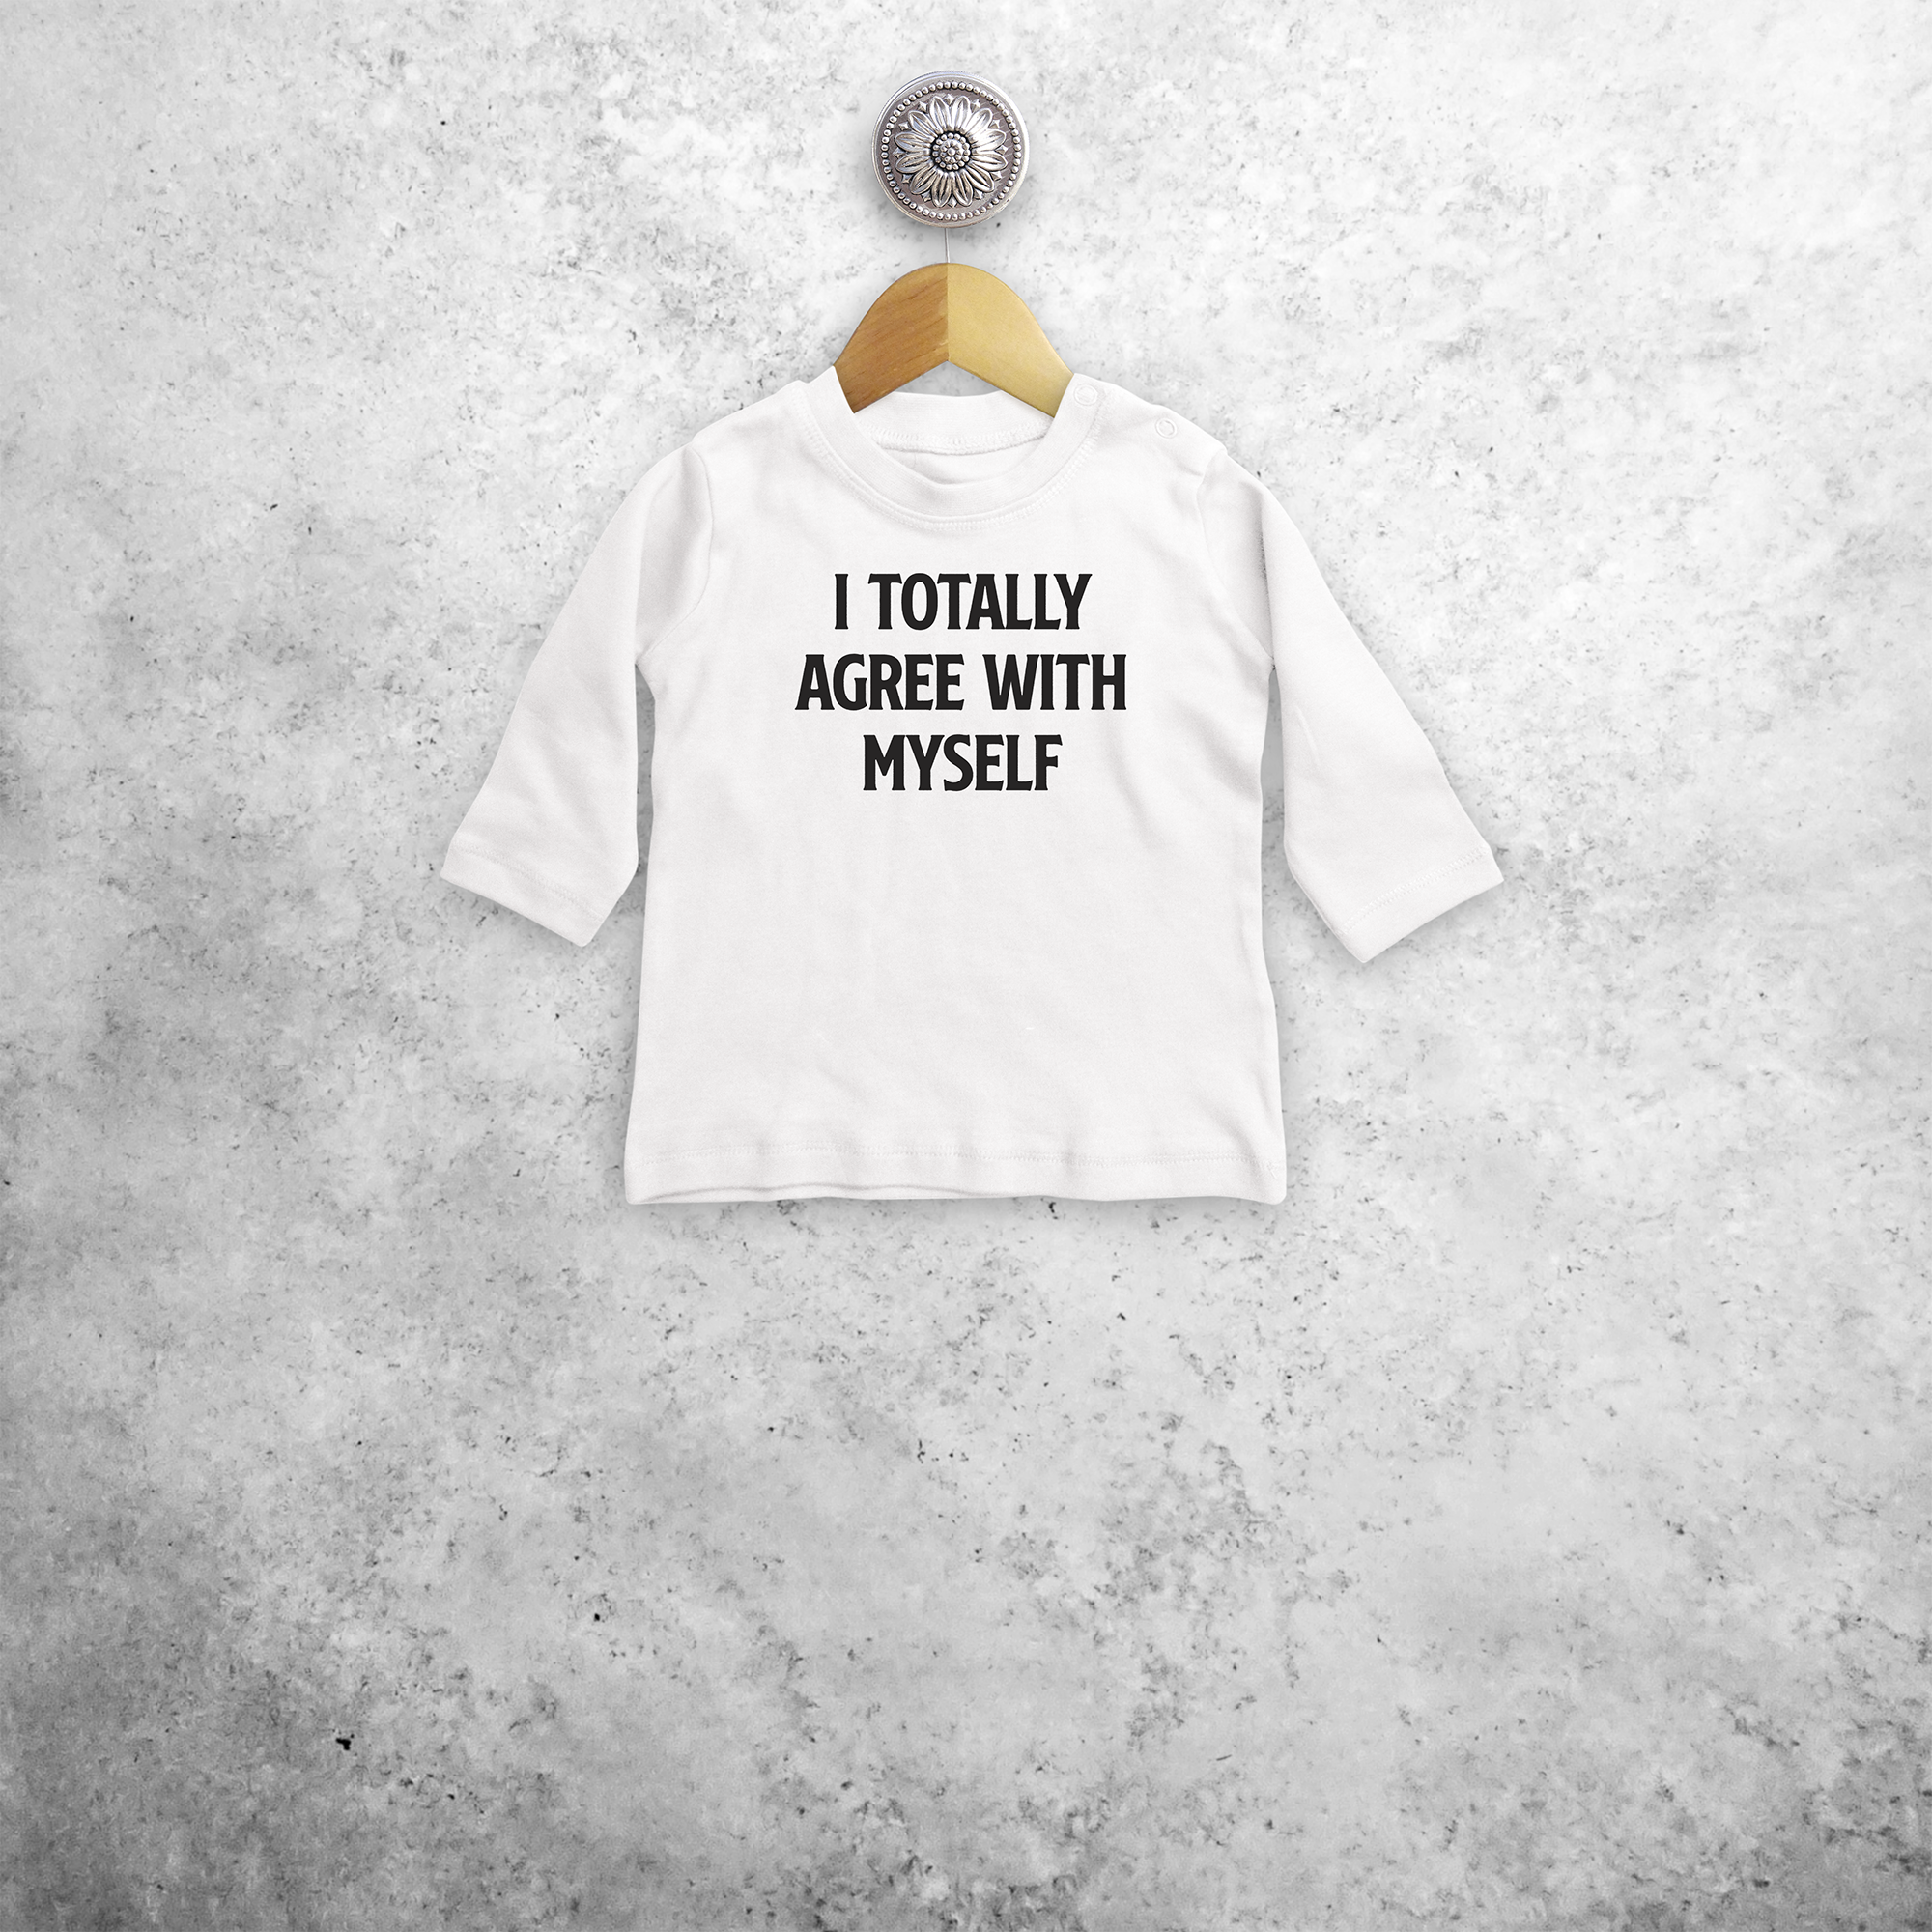 'I totally agree with myself' baby longsleeve shirt